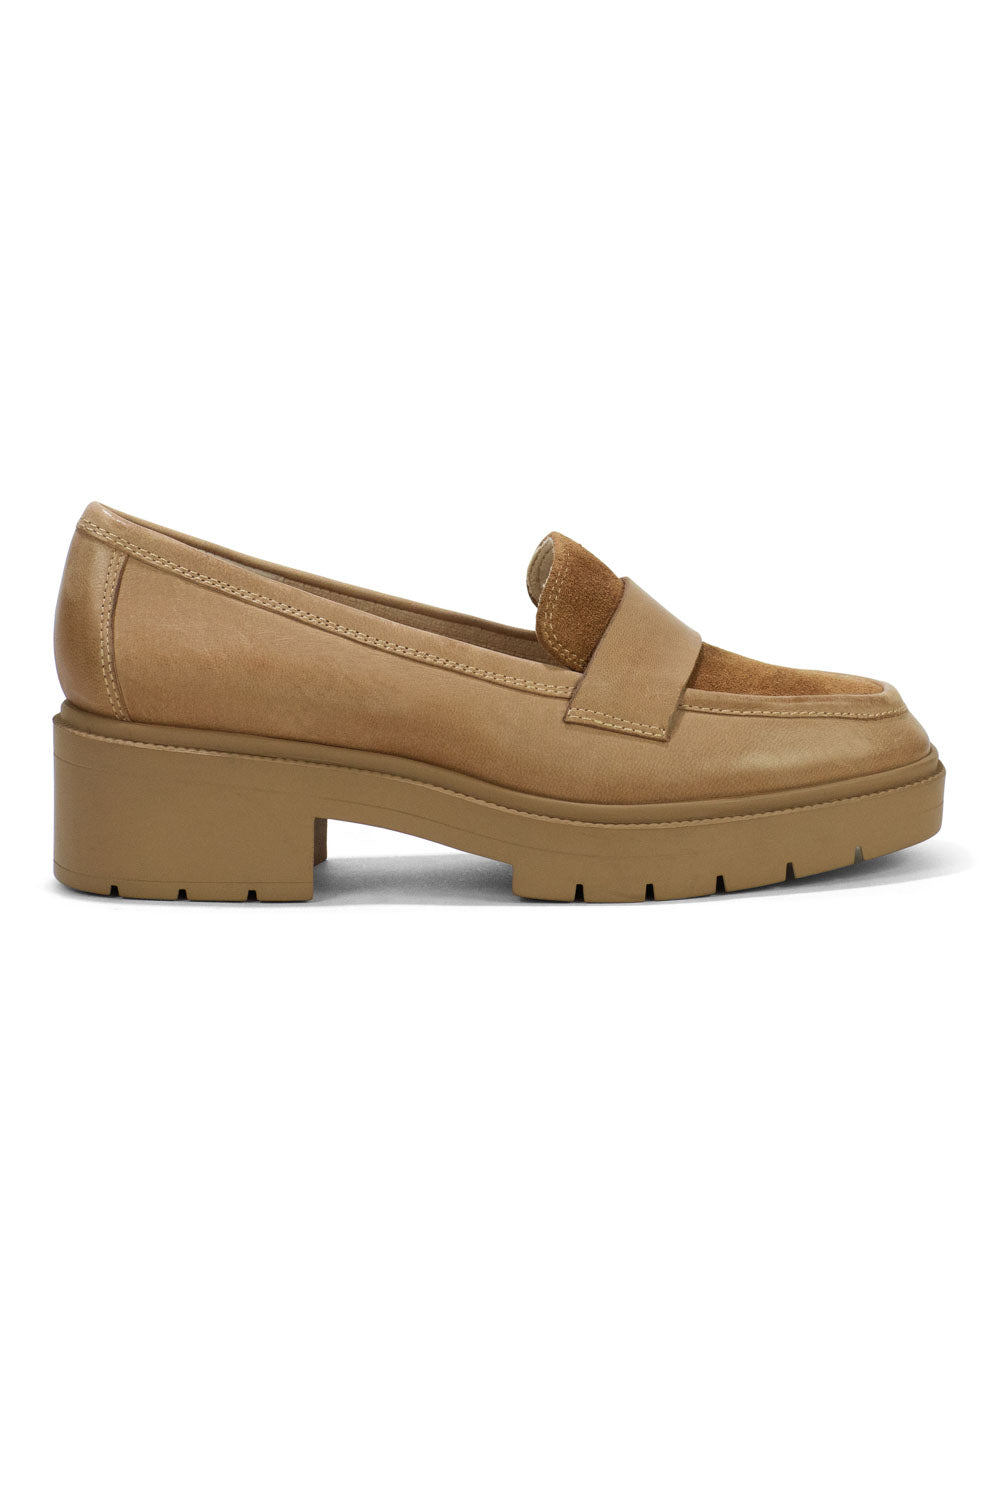 Heidi Loafers In Waxed Calf Leather - Oyster Tan | NYDJ